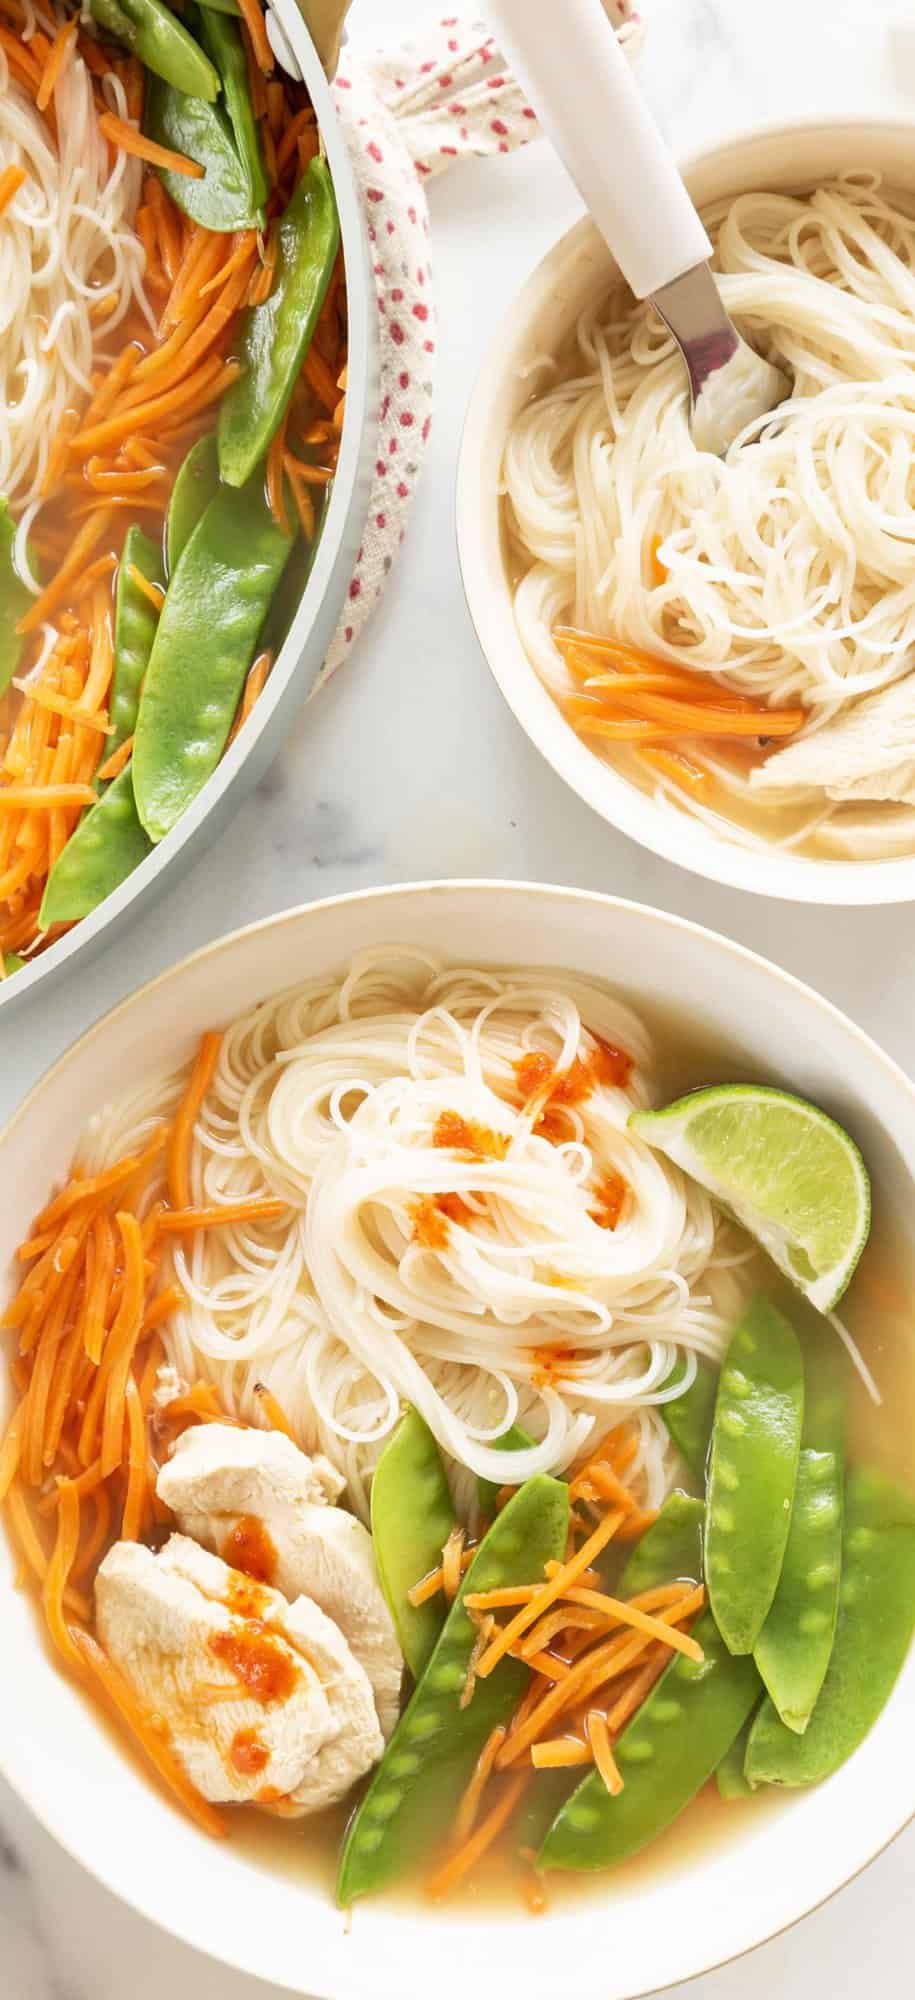 https://www.yummytoddlerfood.com/wp-content/uploads/2023/02/Rice-Noodle-Soup-9-vert-scaled.jpg